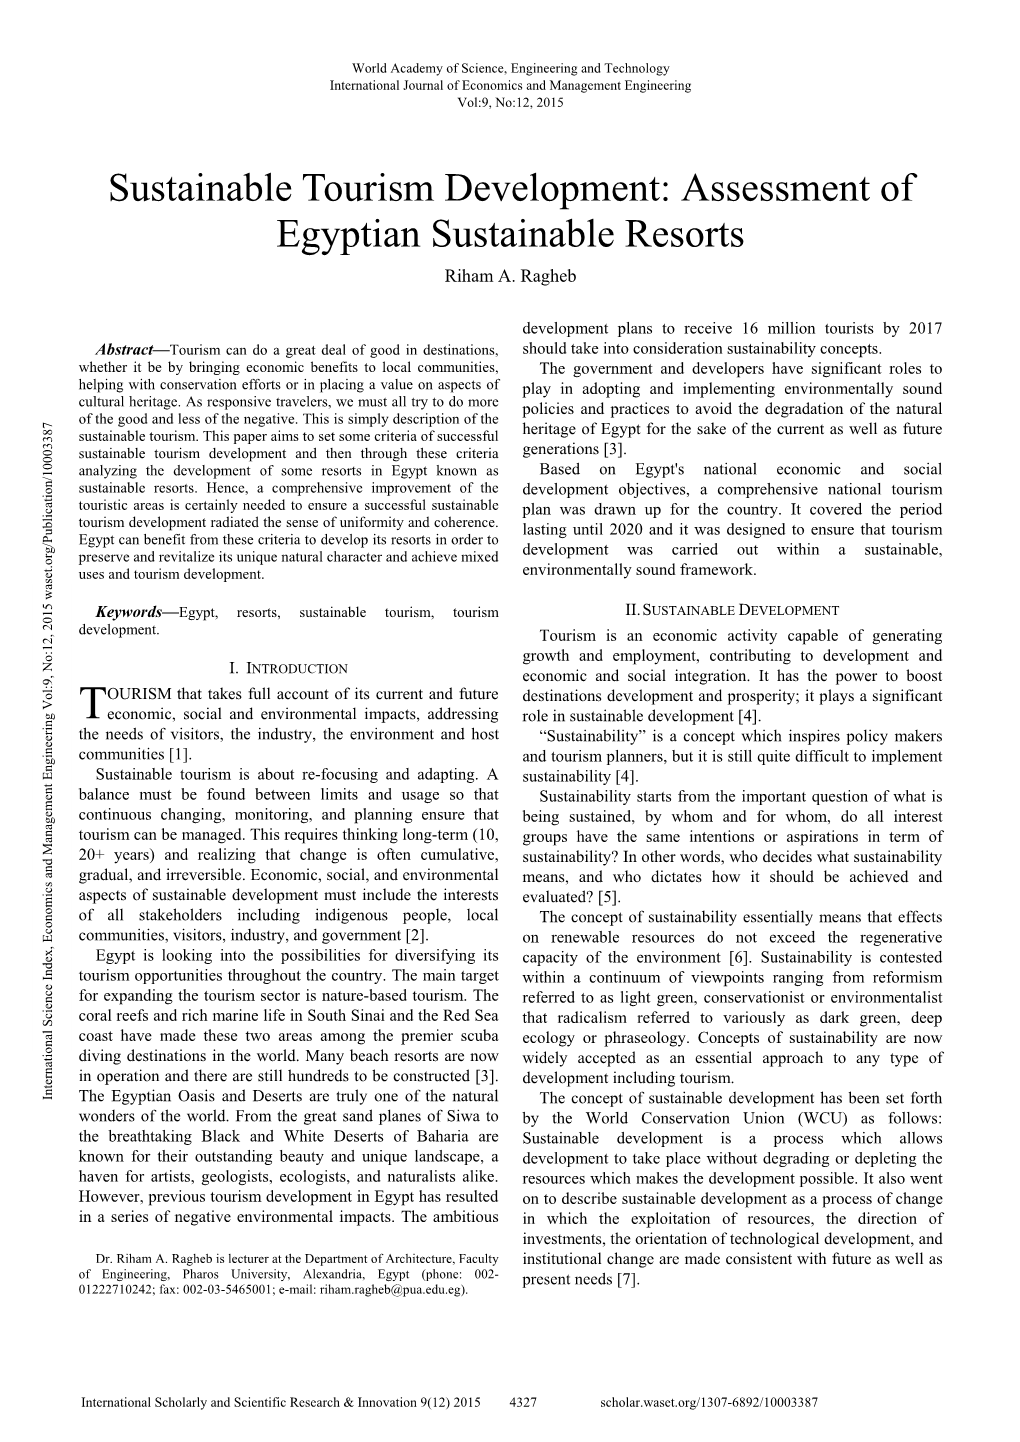 Sustainable Tourism Development: Assessment of Egyptian Sustainable Resorts Riham A